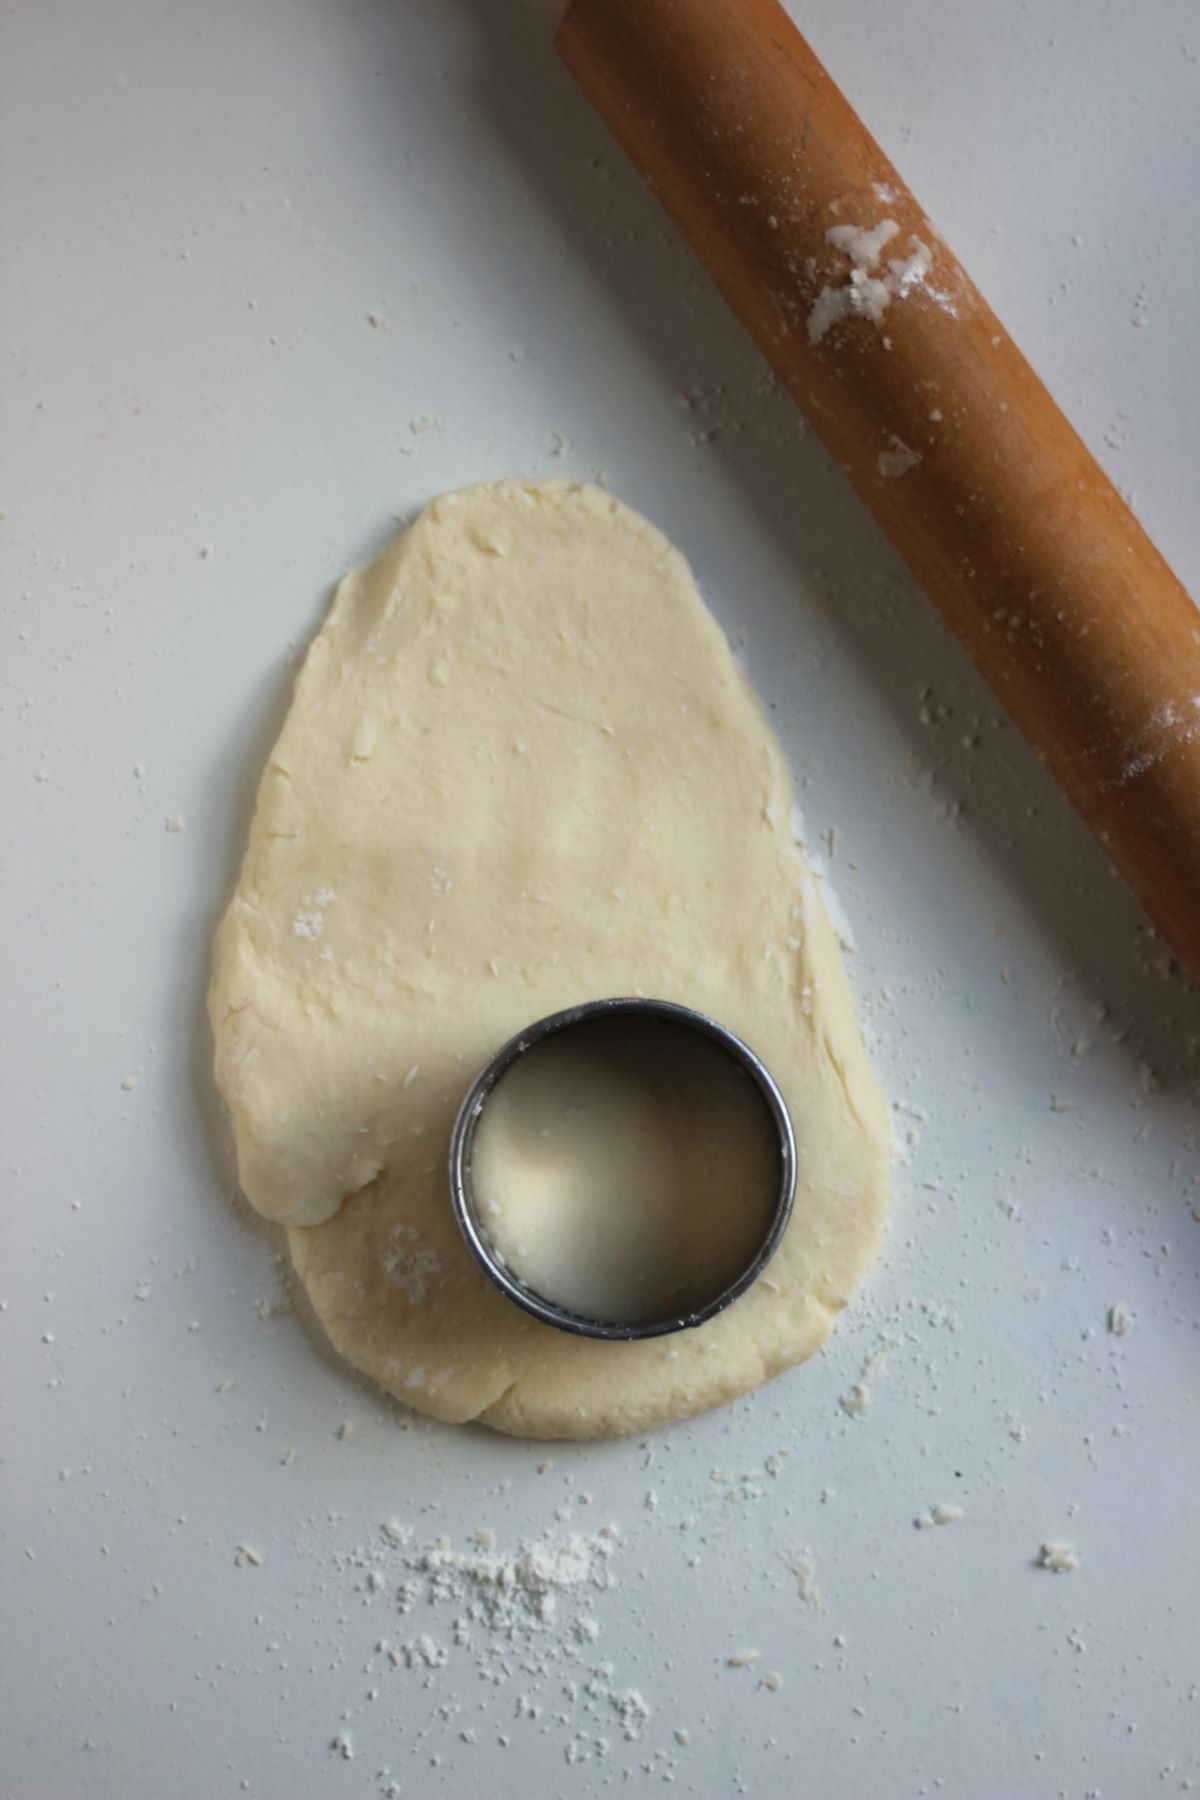 The stretched shortcake dough on a surface. A round biscuit cutter on the dough and rolling pin on the side.